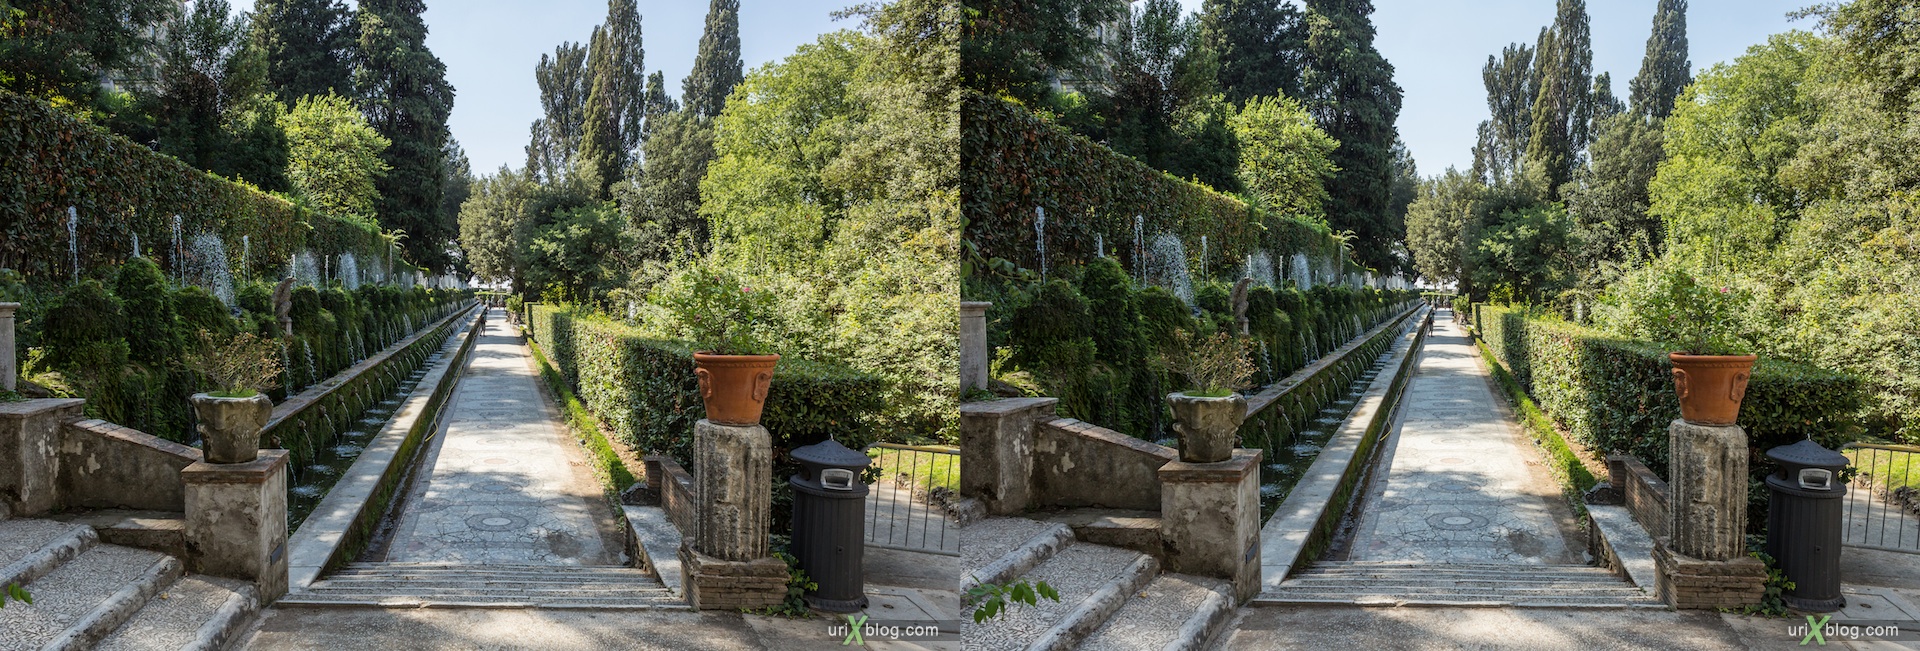 2012, Avenue of the Hundred Fountains, Viale delle Cento Fontane, villa D'Este, Italy, Tivoli, Rome, 3D, stereo pair, cross-eyed, crossview, cross view stereo pair